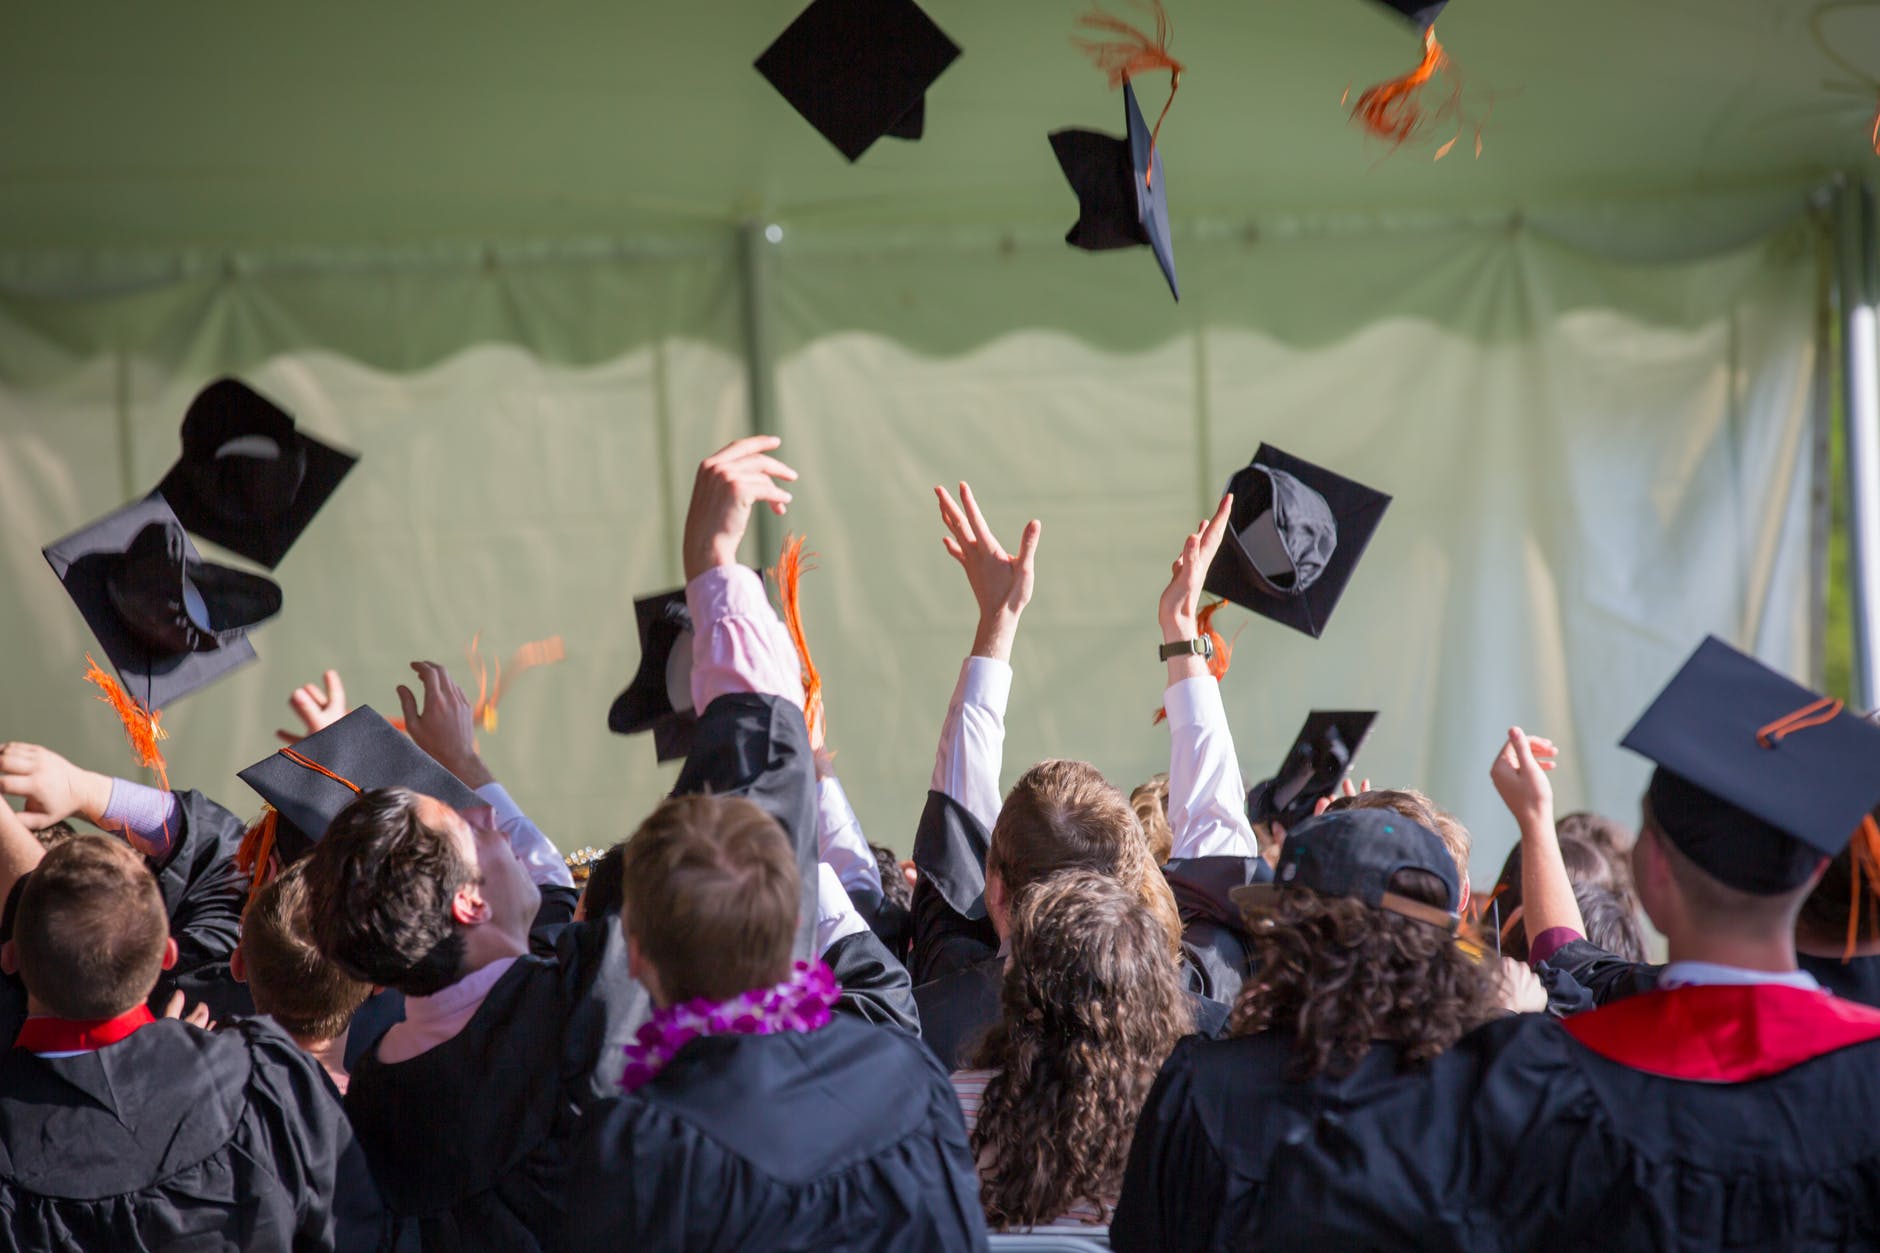 A group of students throwing graduation caps into the air